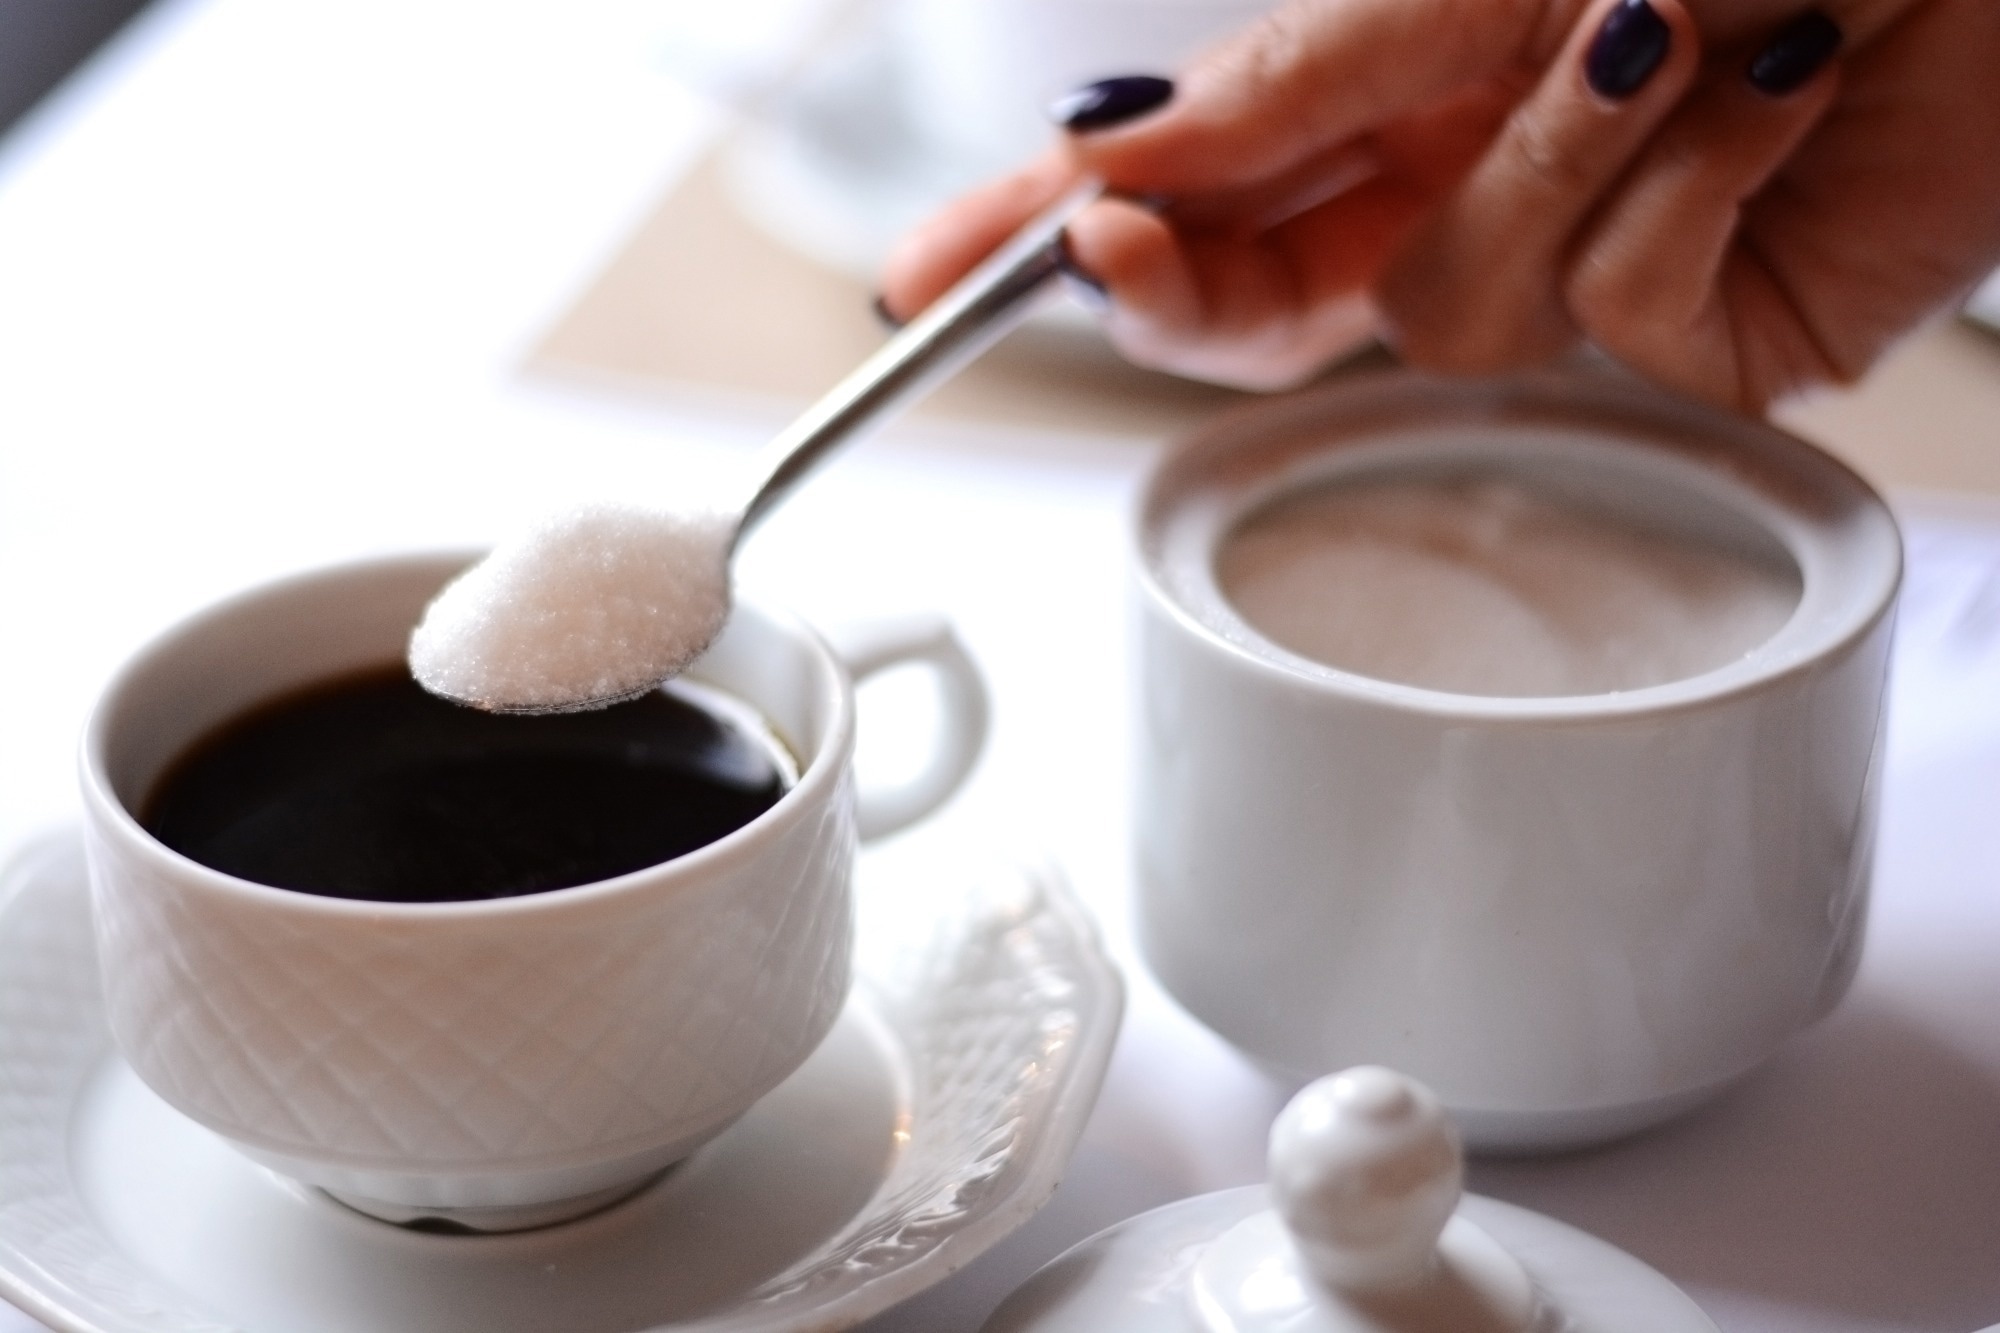 Study: Total added sugar consumption is not significantly associated with risk for prediabetes among U.S. adults: National Health and Nutrition Examination Survey, 2013-2018. Image Credit: Eviart / Shutterstock.com